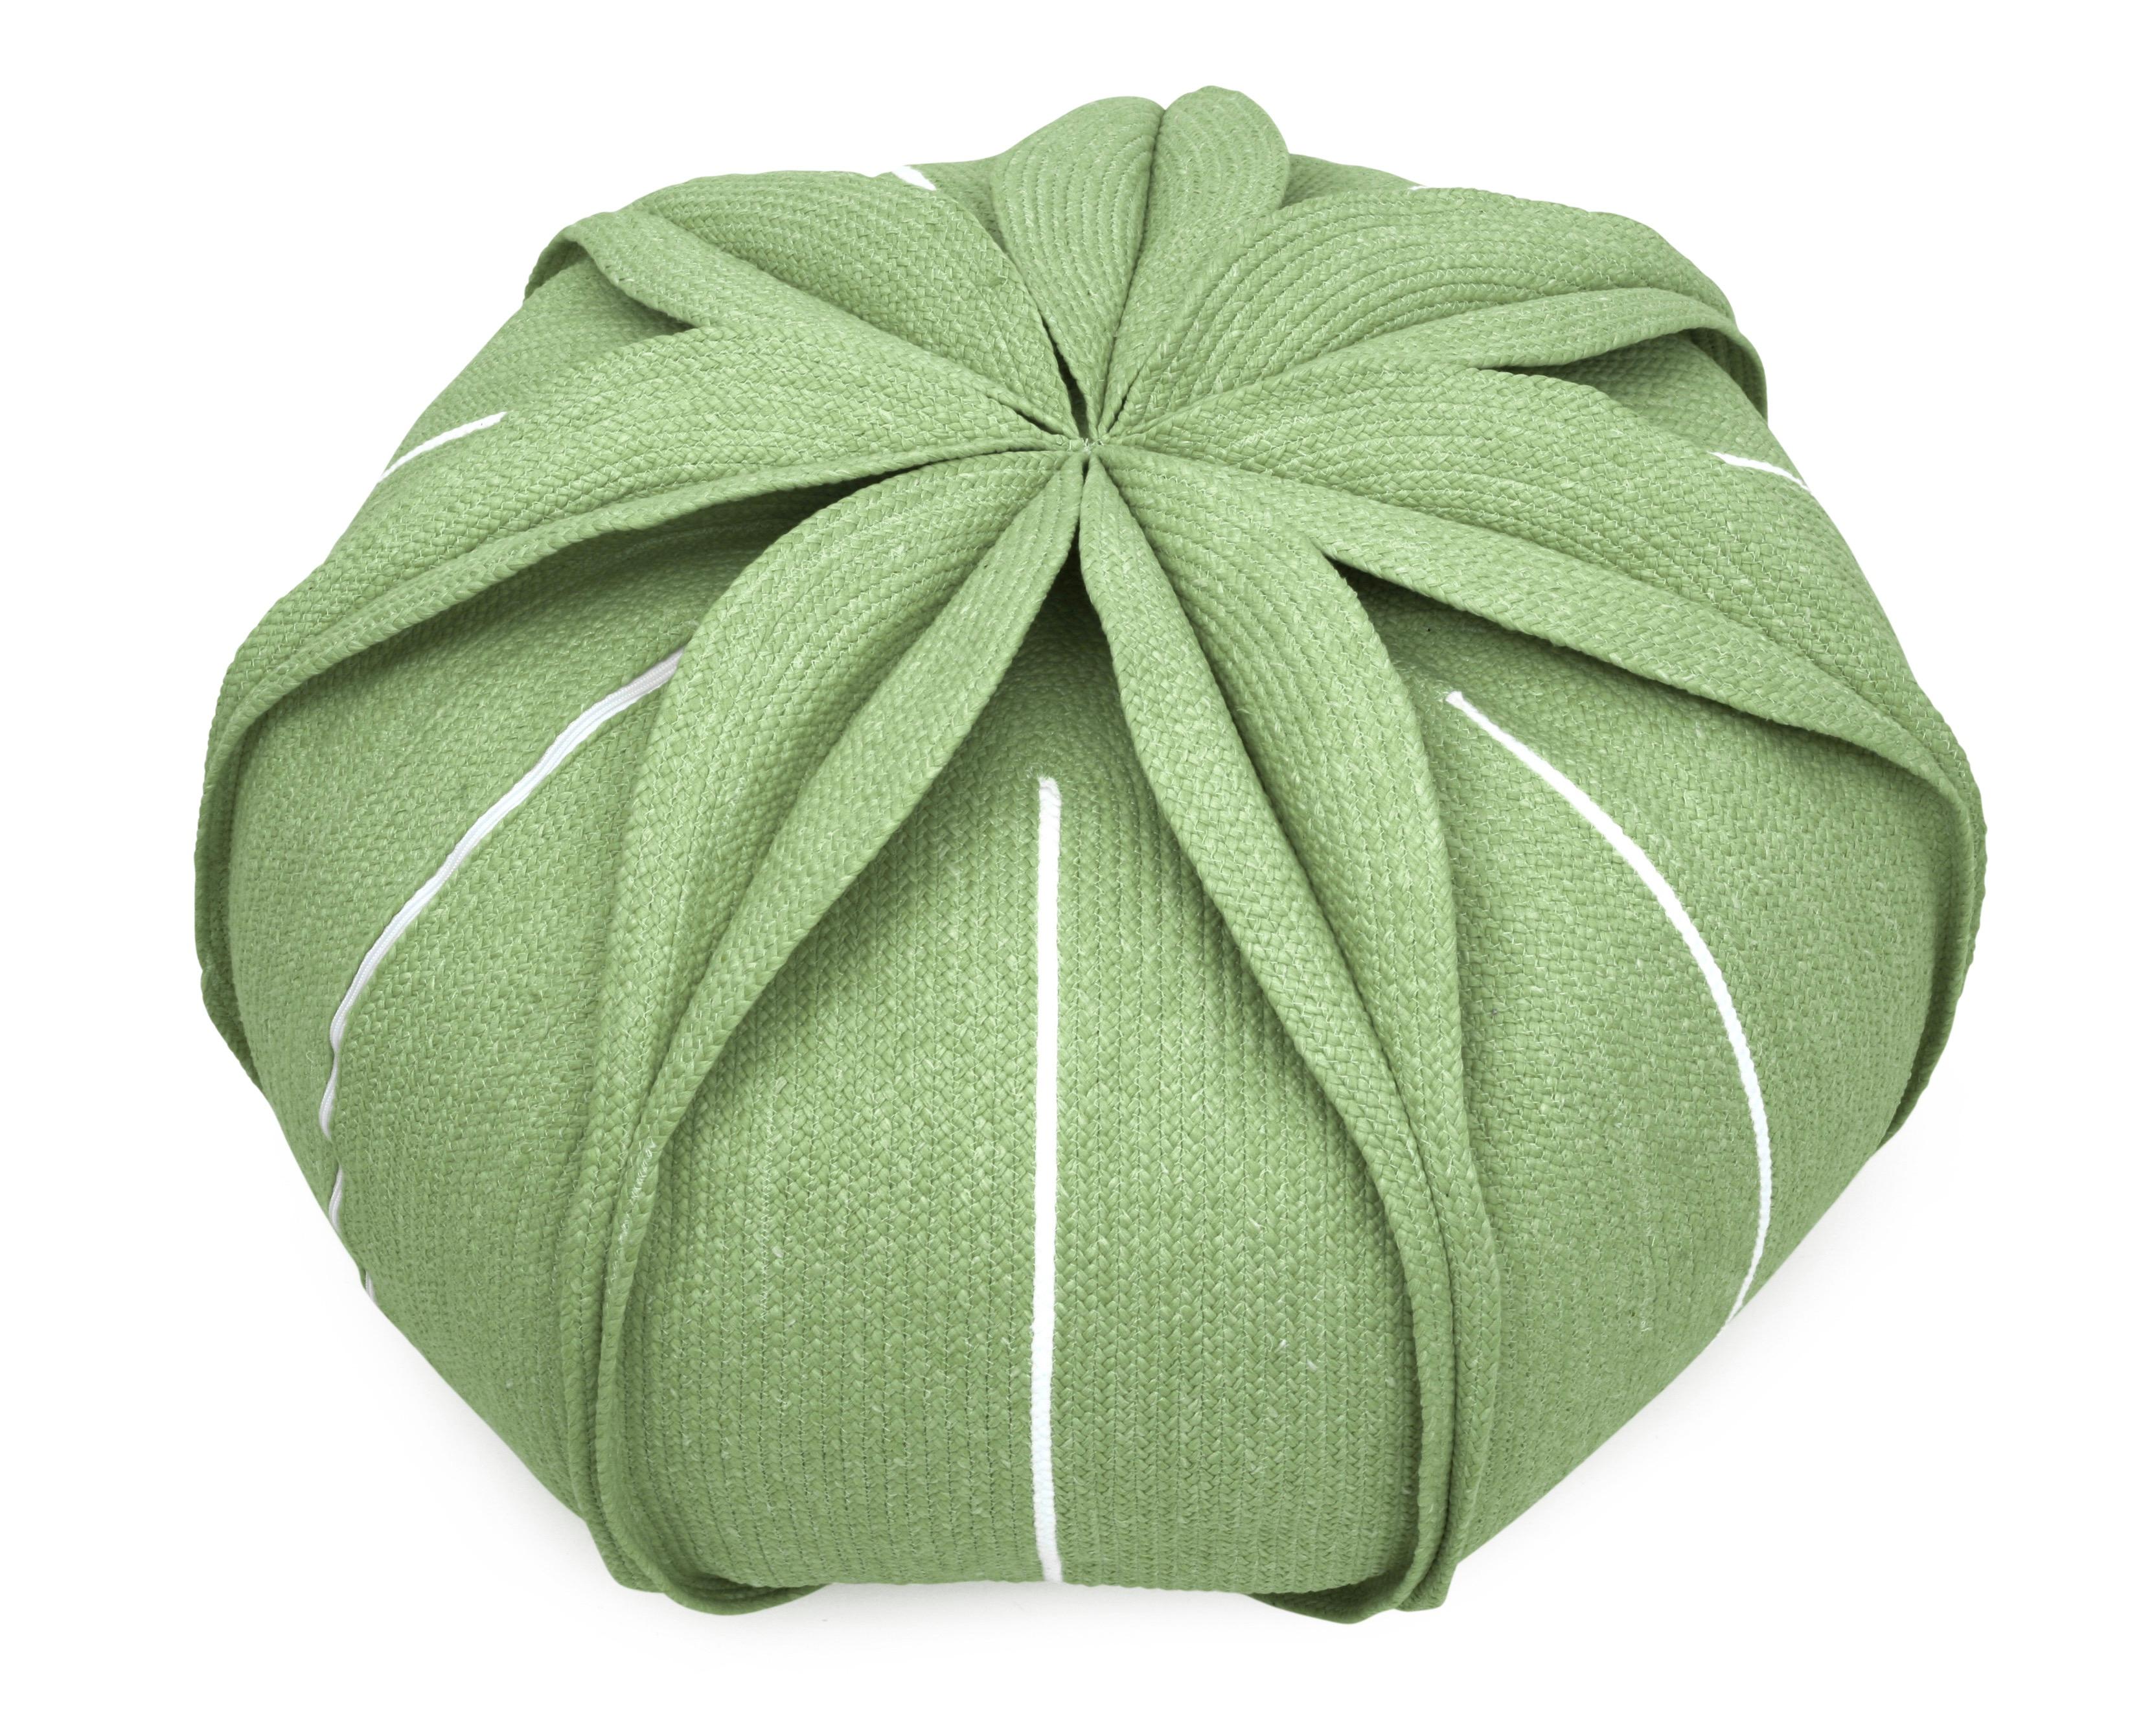 Organic Modern Flower Shaped Pouf - Eucharis Green Small For Sale